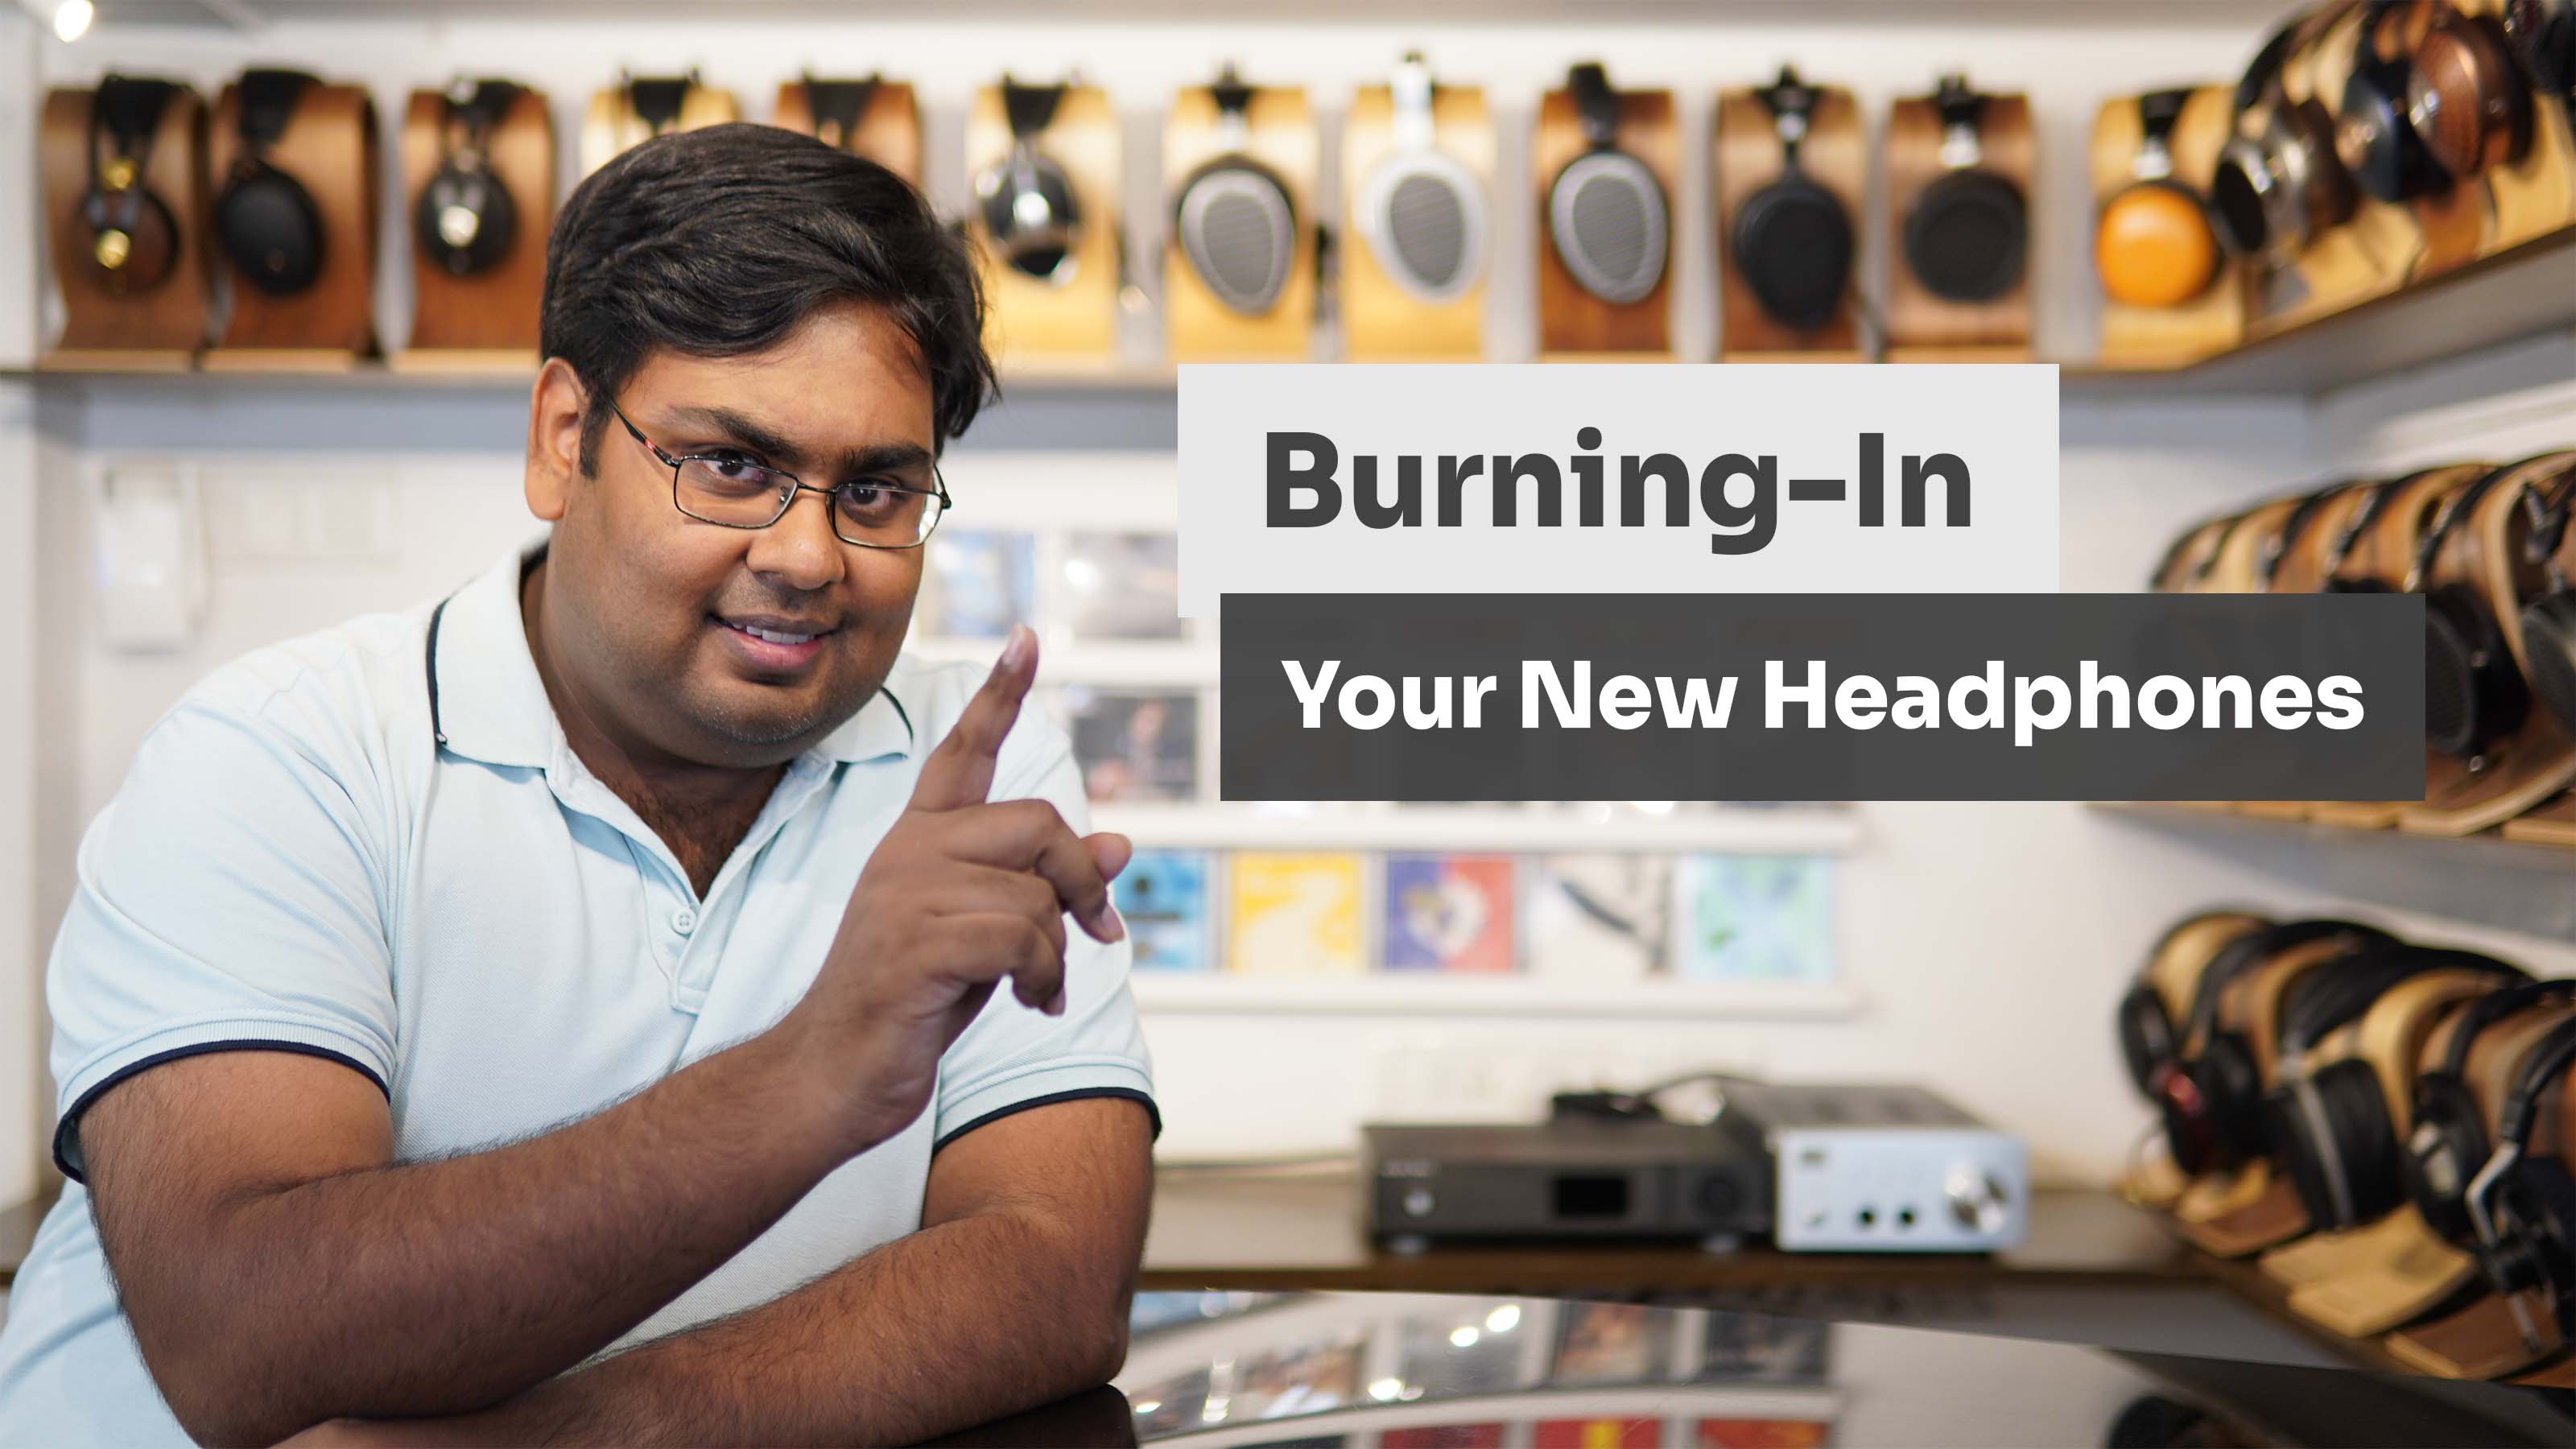 Why you should burn in your brand new headphones?